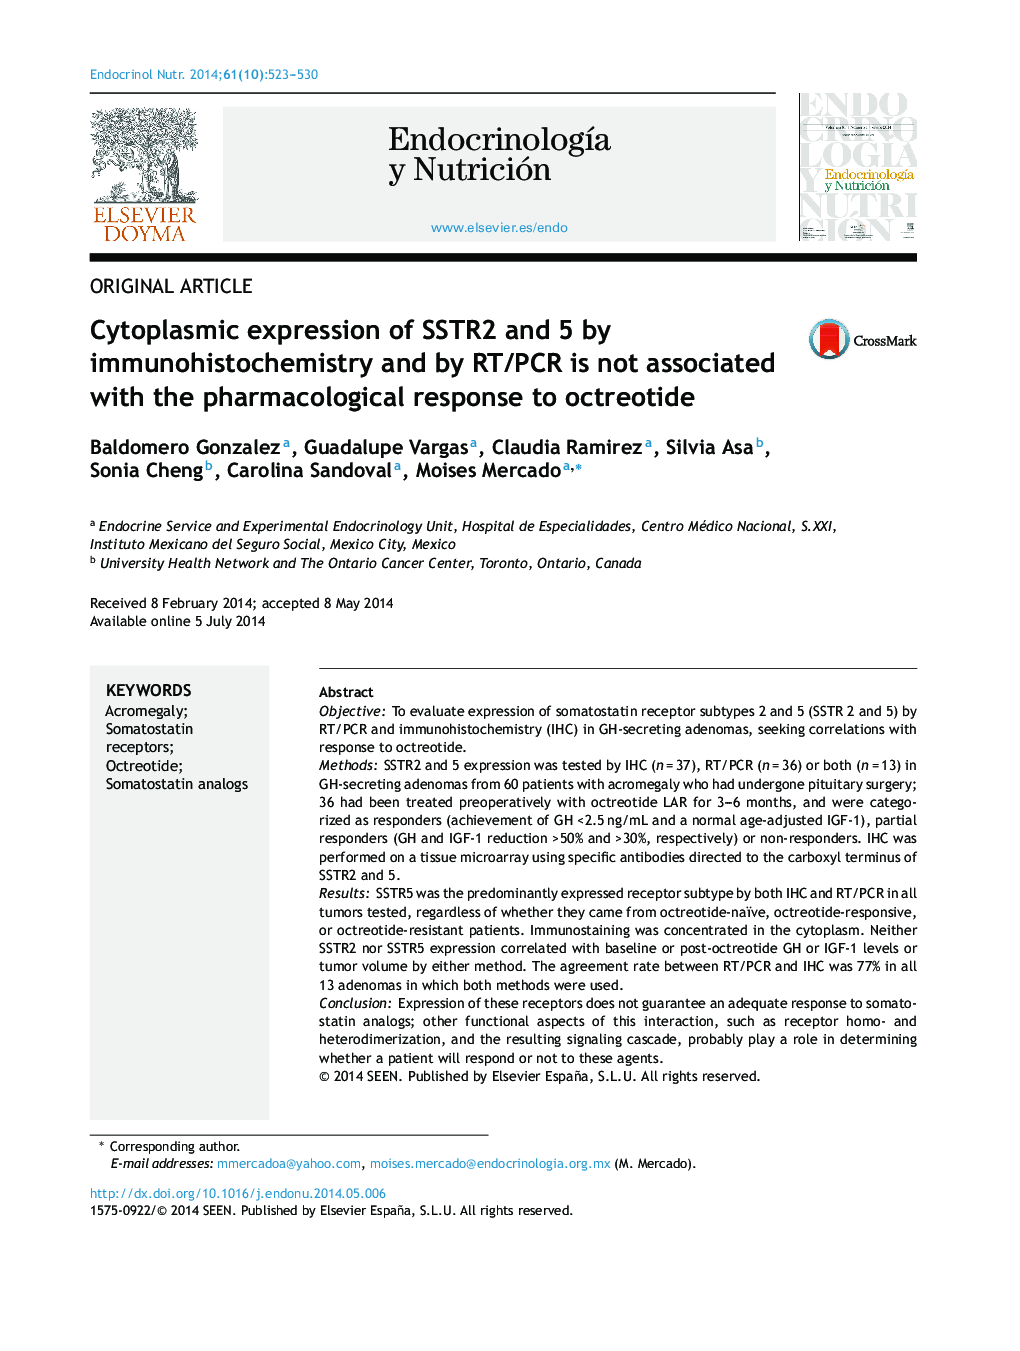 Cytoplasmic expression of SSTR2 and 5 by immunohistochemistry and by RT/PCR is not associated with the pharmacological response to octreotide